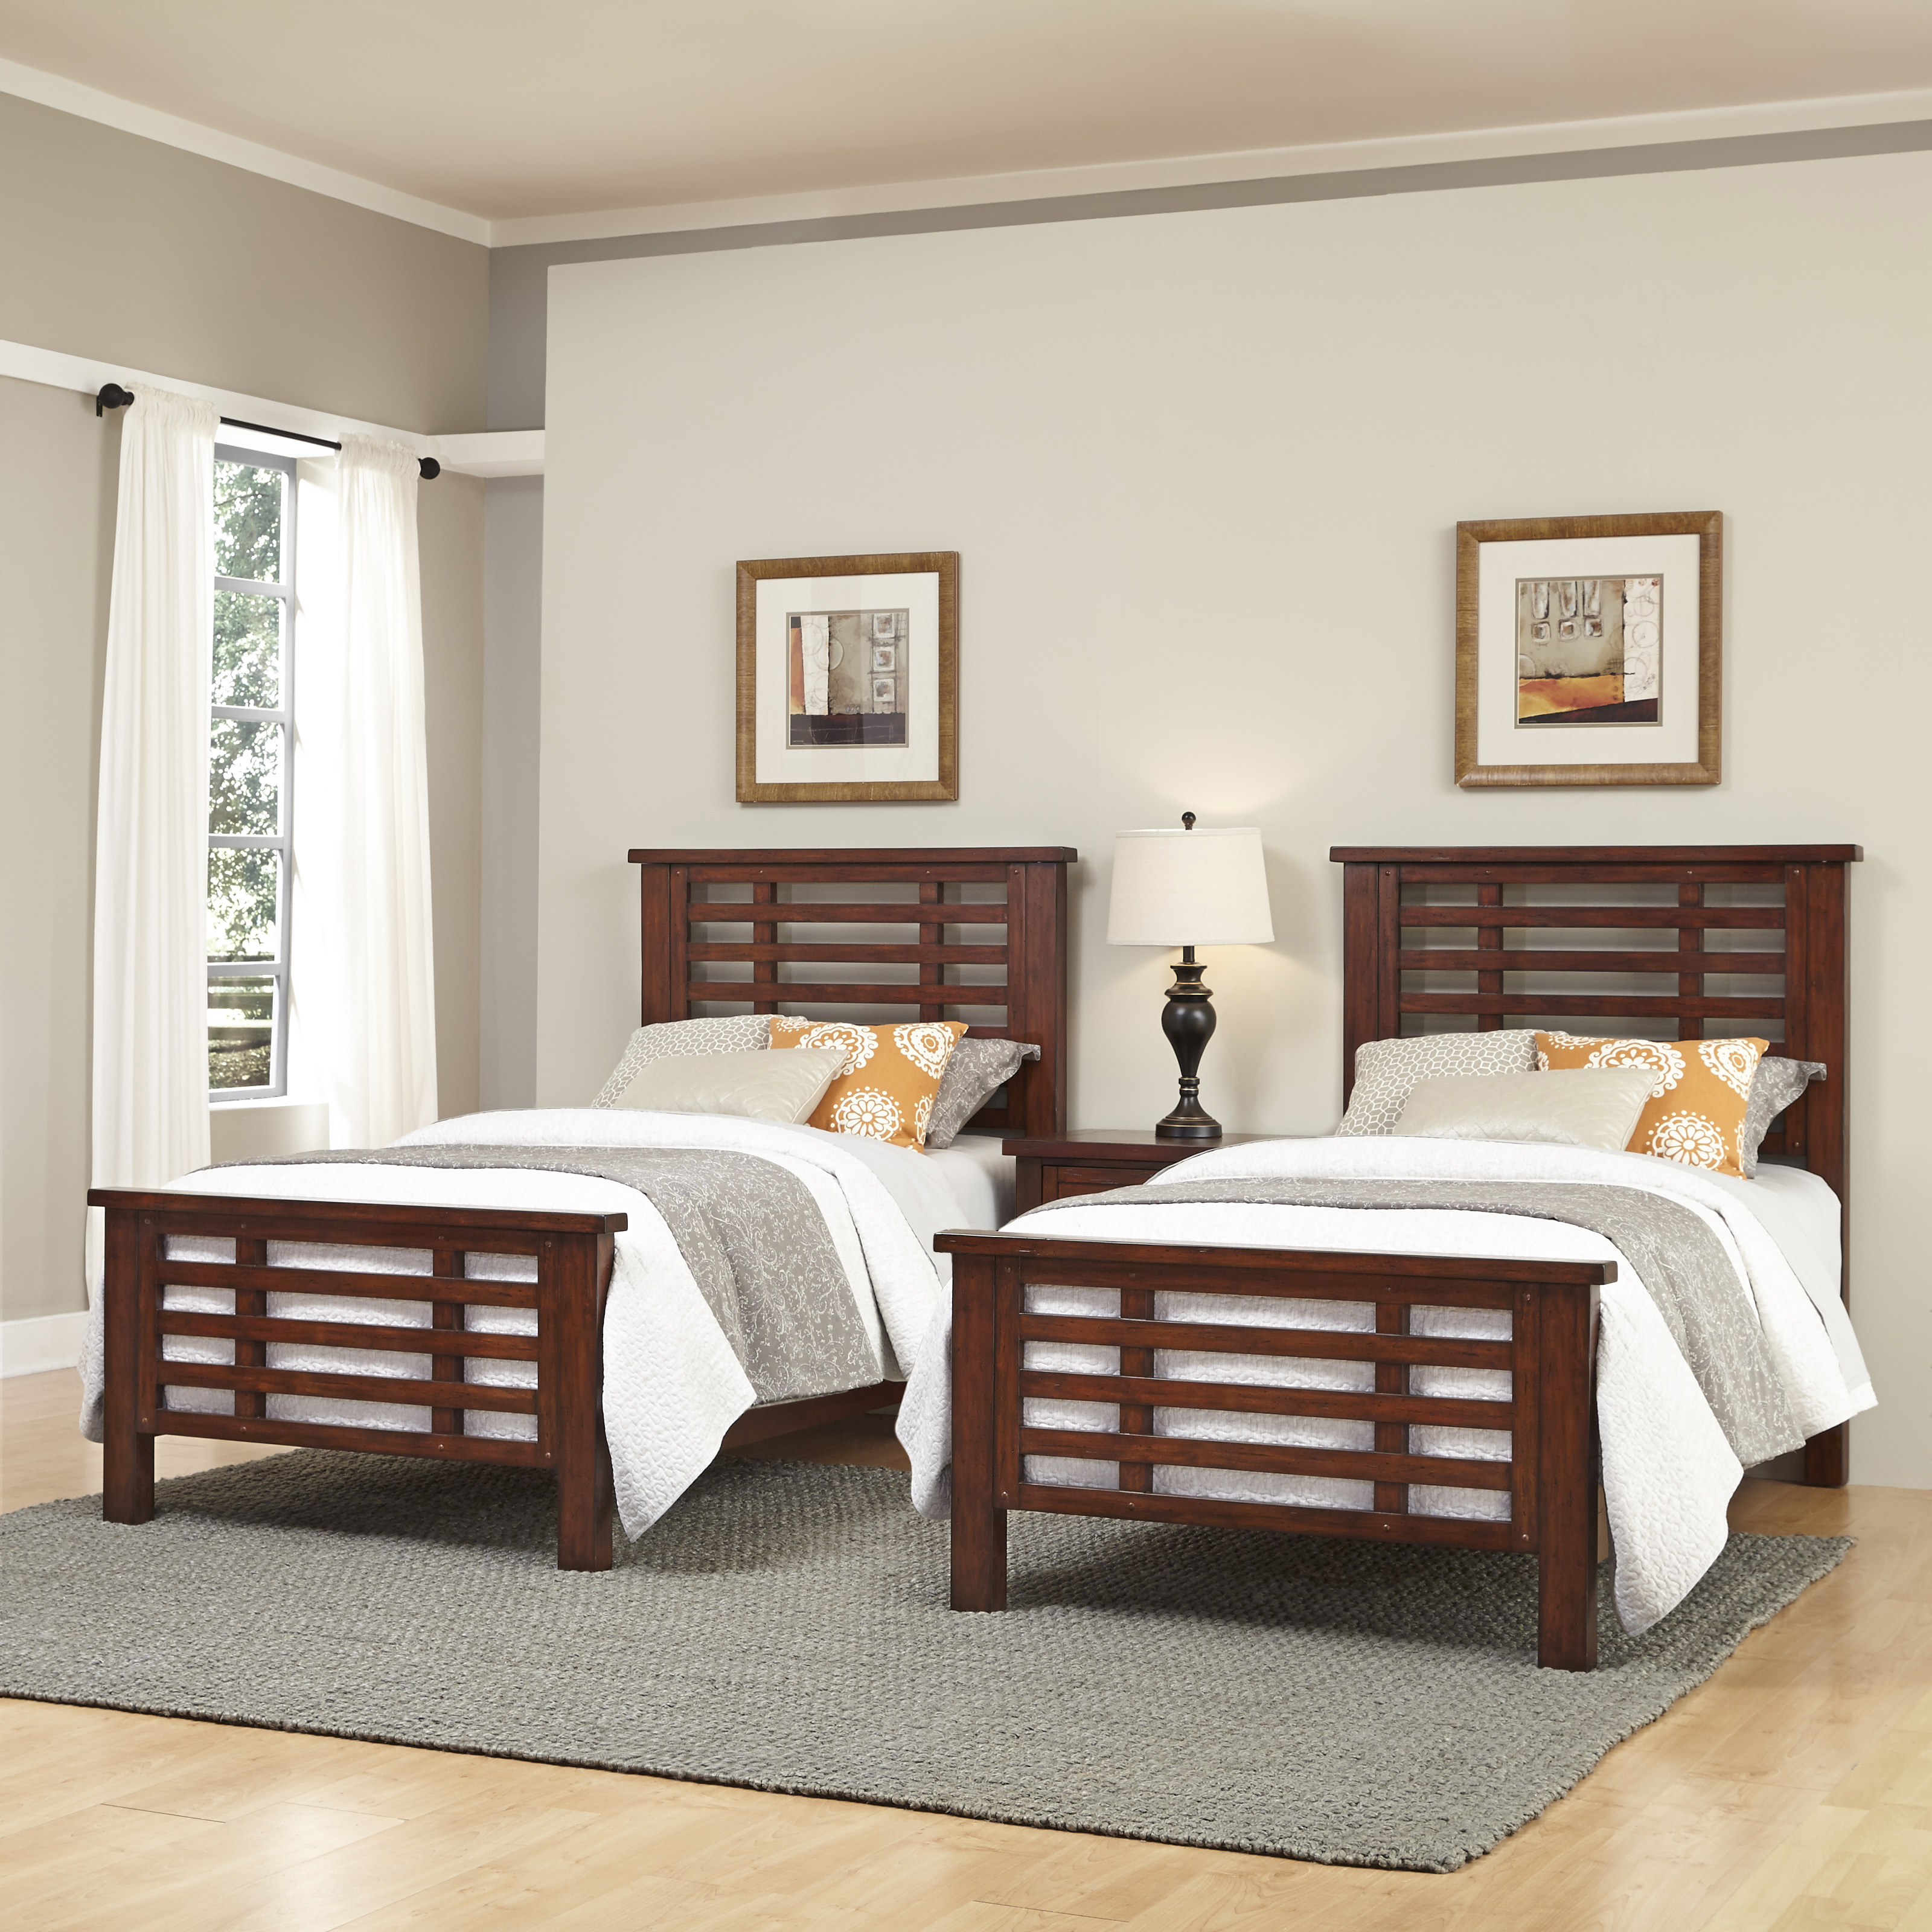 Creatice Bedroom With Twin Beds for Large Space